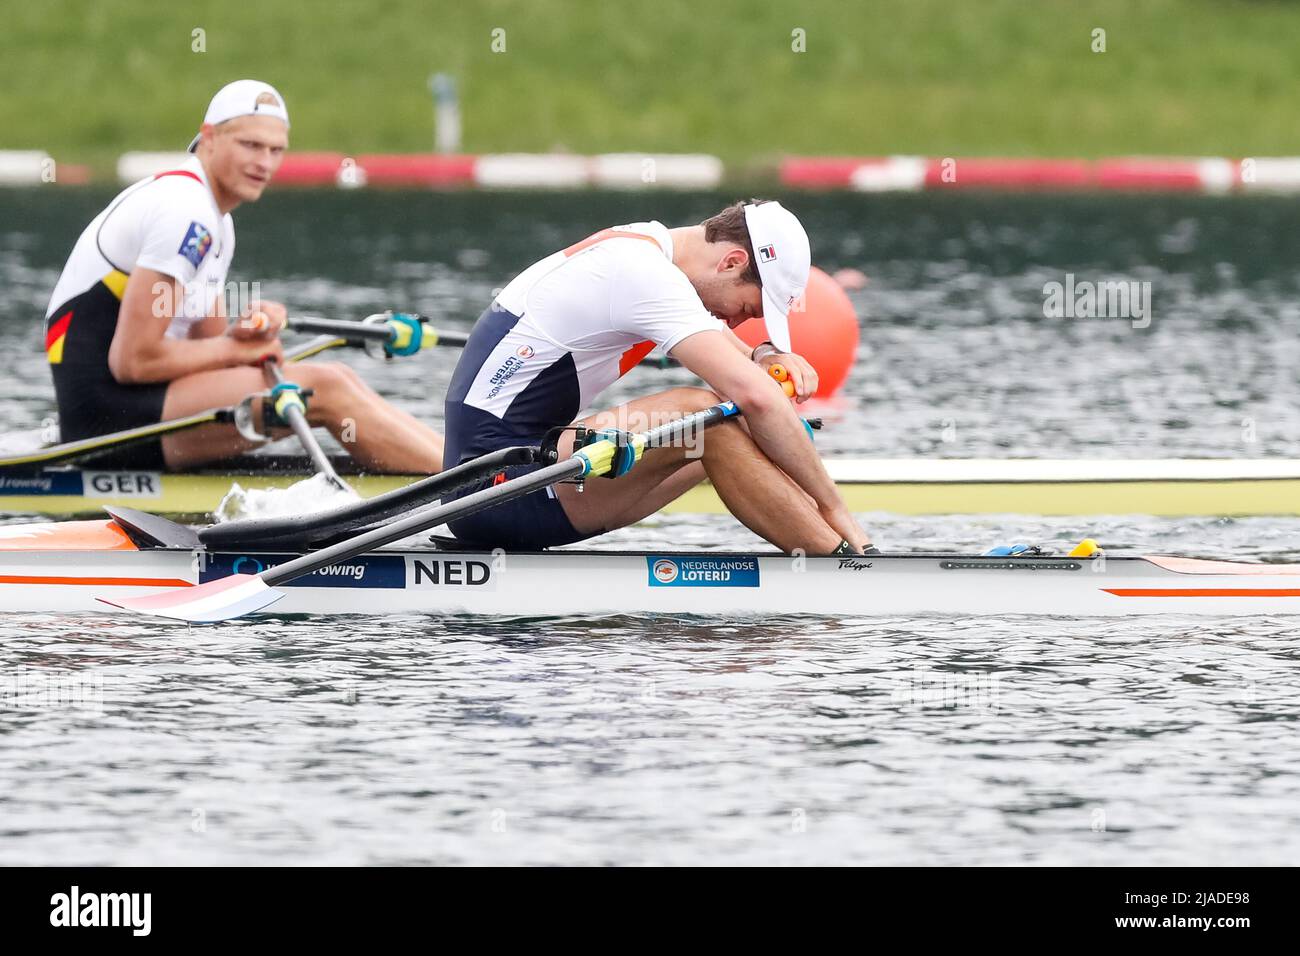 BELGRADE, SERBIA - MAY 29: Melvin Twellaar of the Netherlands competing in the Men's Single Sculls Final FA during the World Rowing Cup at the Sava Lake on May 29, 2022 in Belgrade, Serbia (Photo by Nikola Krstic/Orange Pictures) Stock Photo